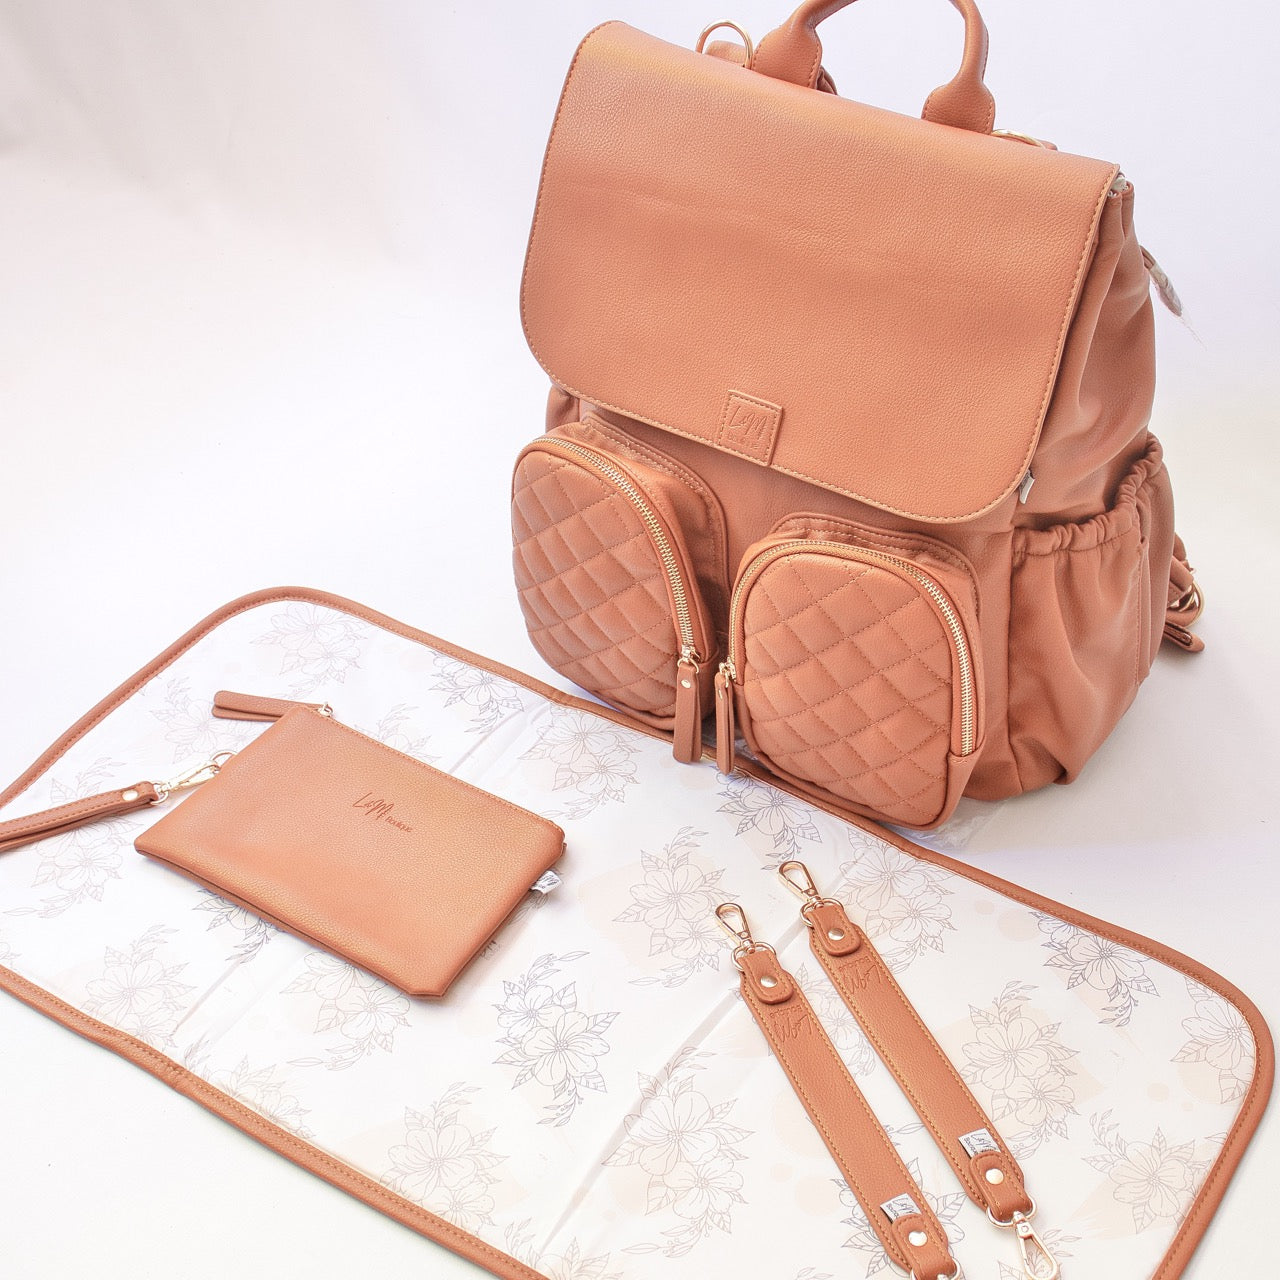 Milana Nappy Backpack in Tan by L&M Boutique Australia | Tan Baby Bag | Nappy Backpack | Diaper Bag | Changing Bag